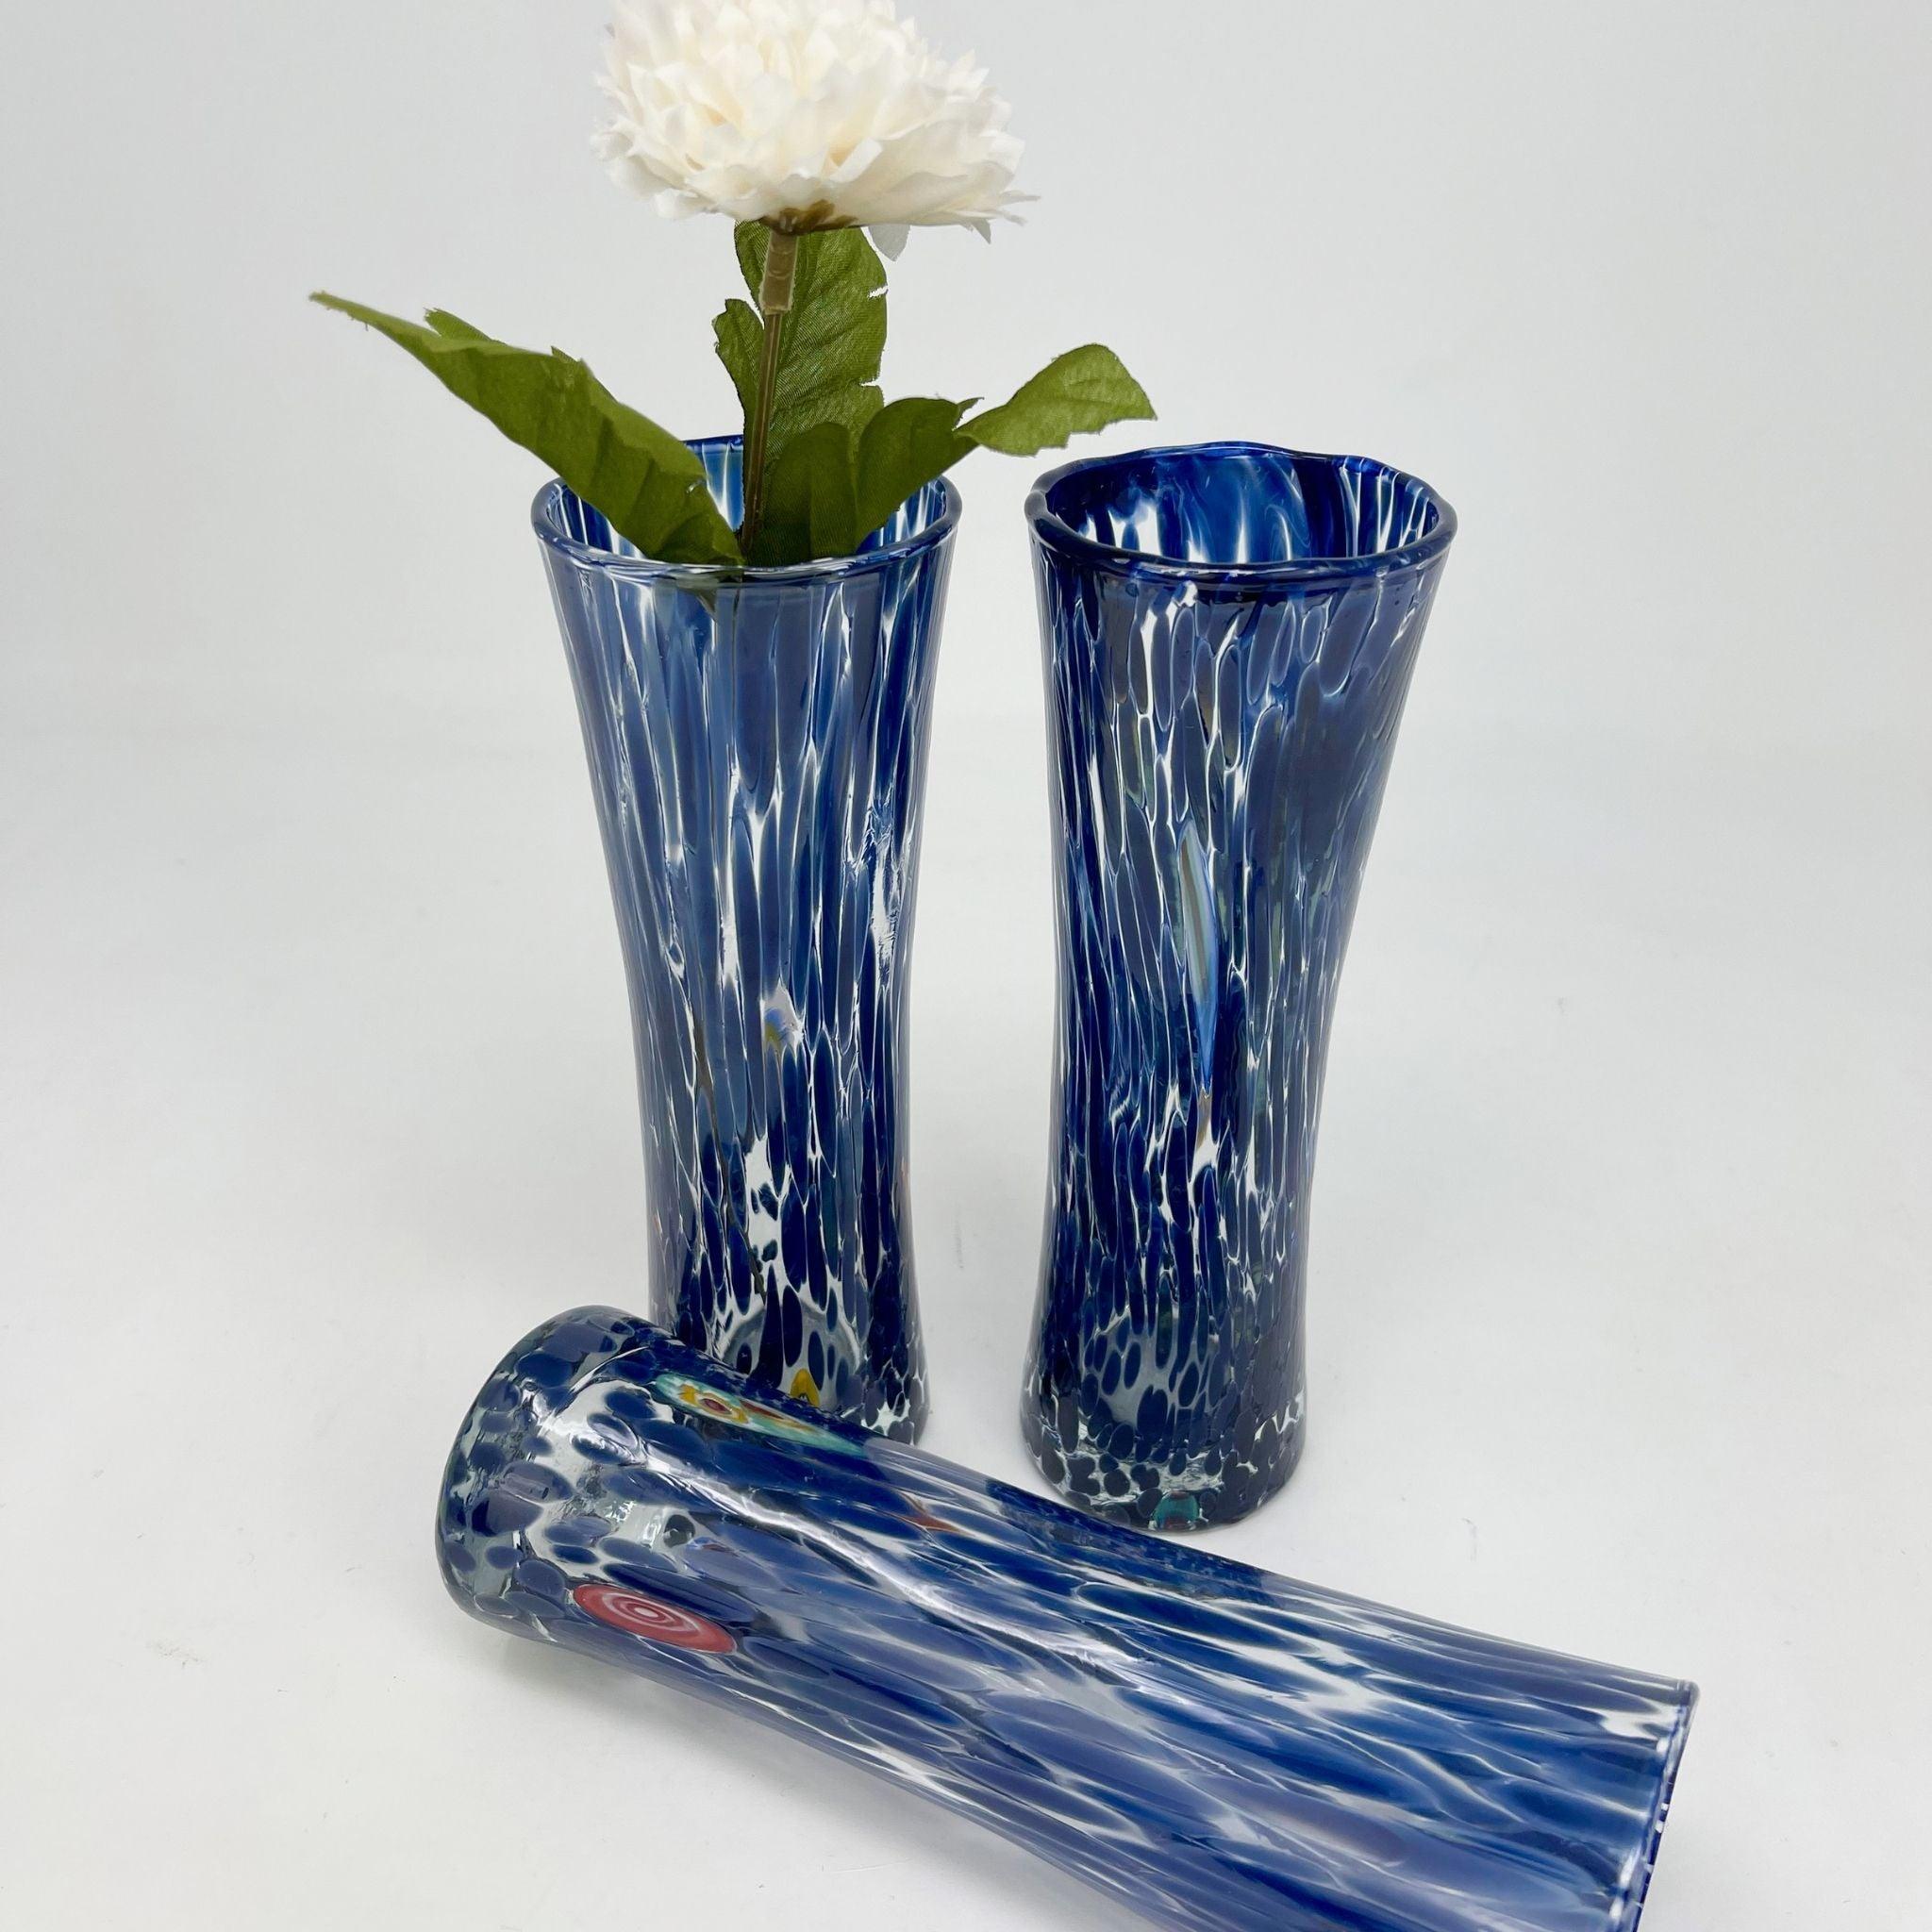 Murano Glass Bud Vase, Contemporary, Made in Italy